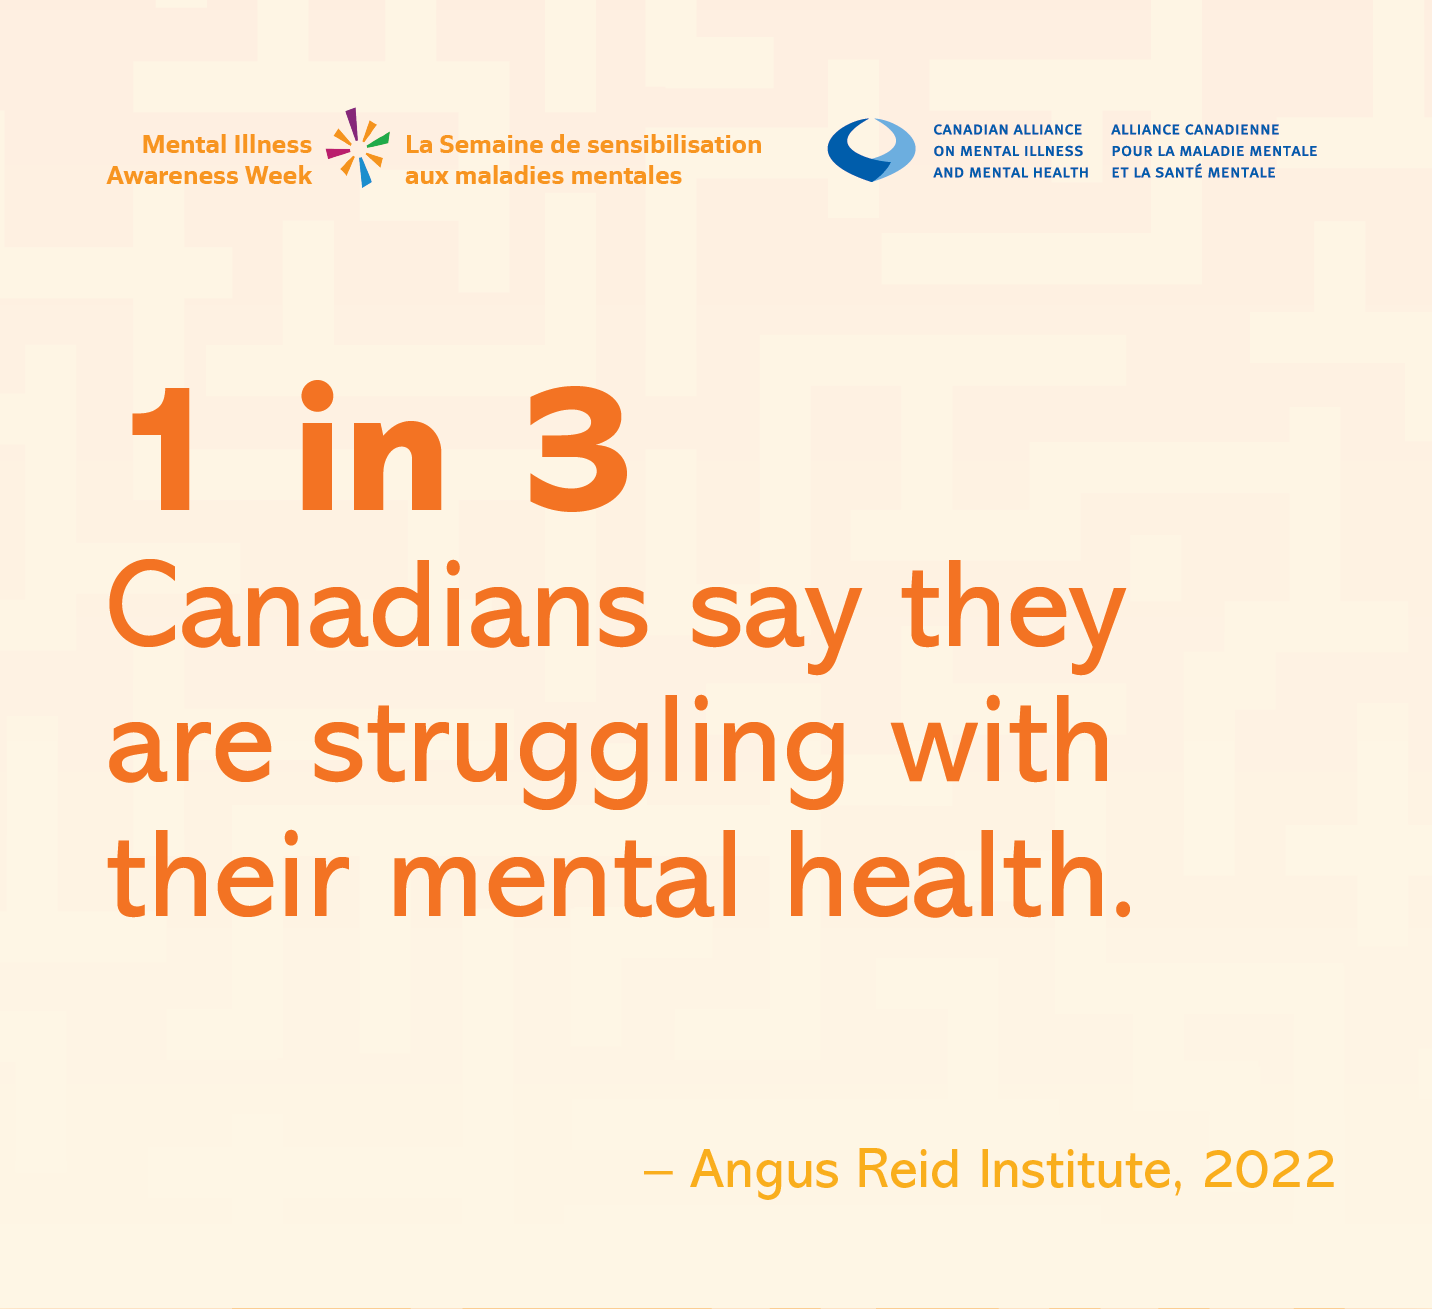 Orange text on beige background reads "1 in 3 Canadians say they are struggling with their mental health"